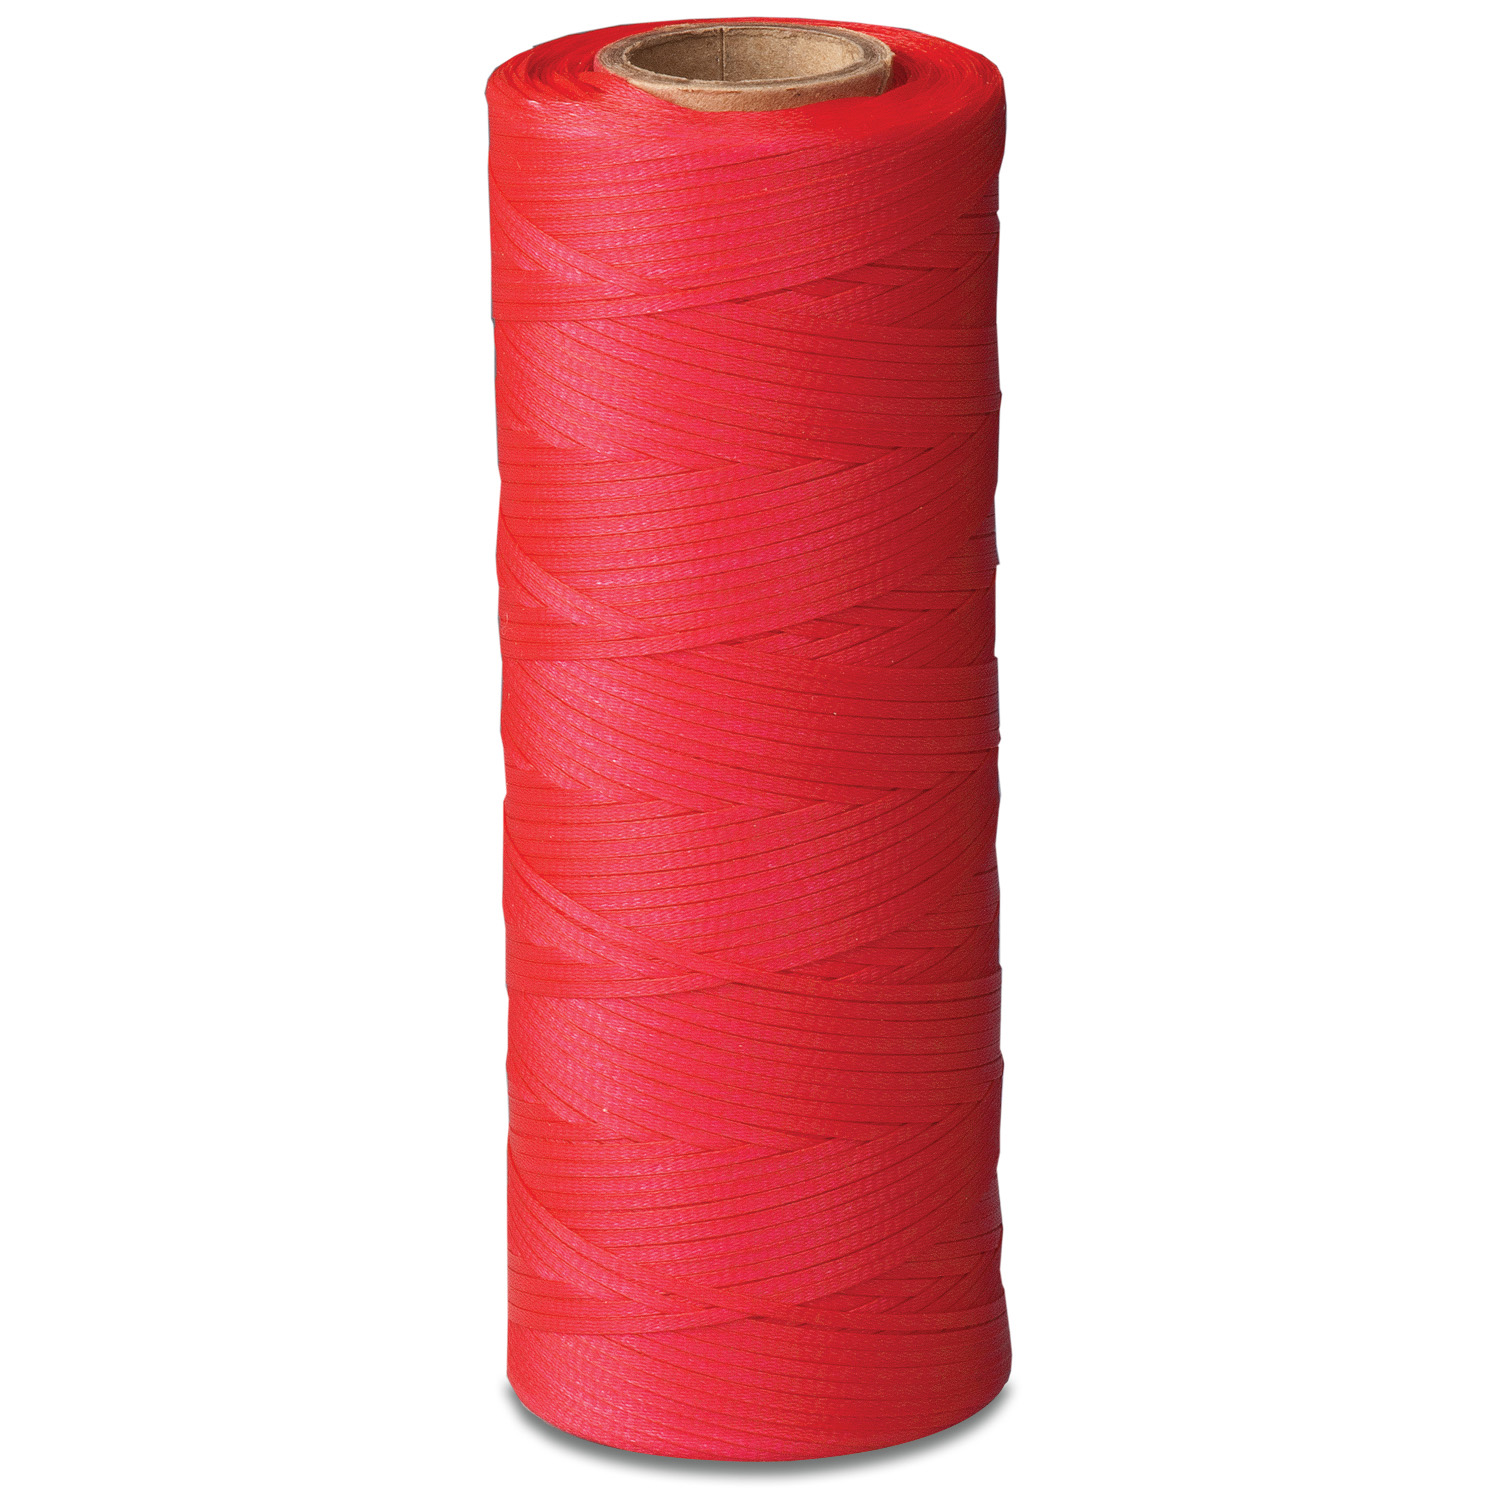 Braided Polyester (Dacron) Lacing Tape